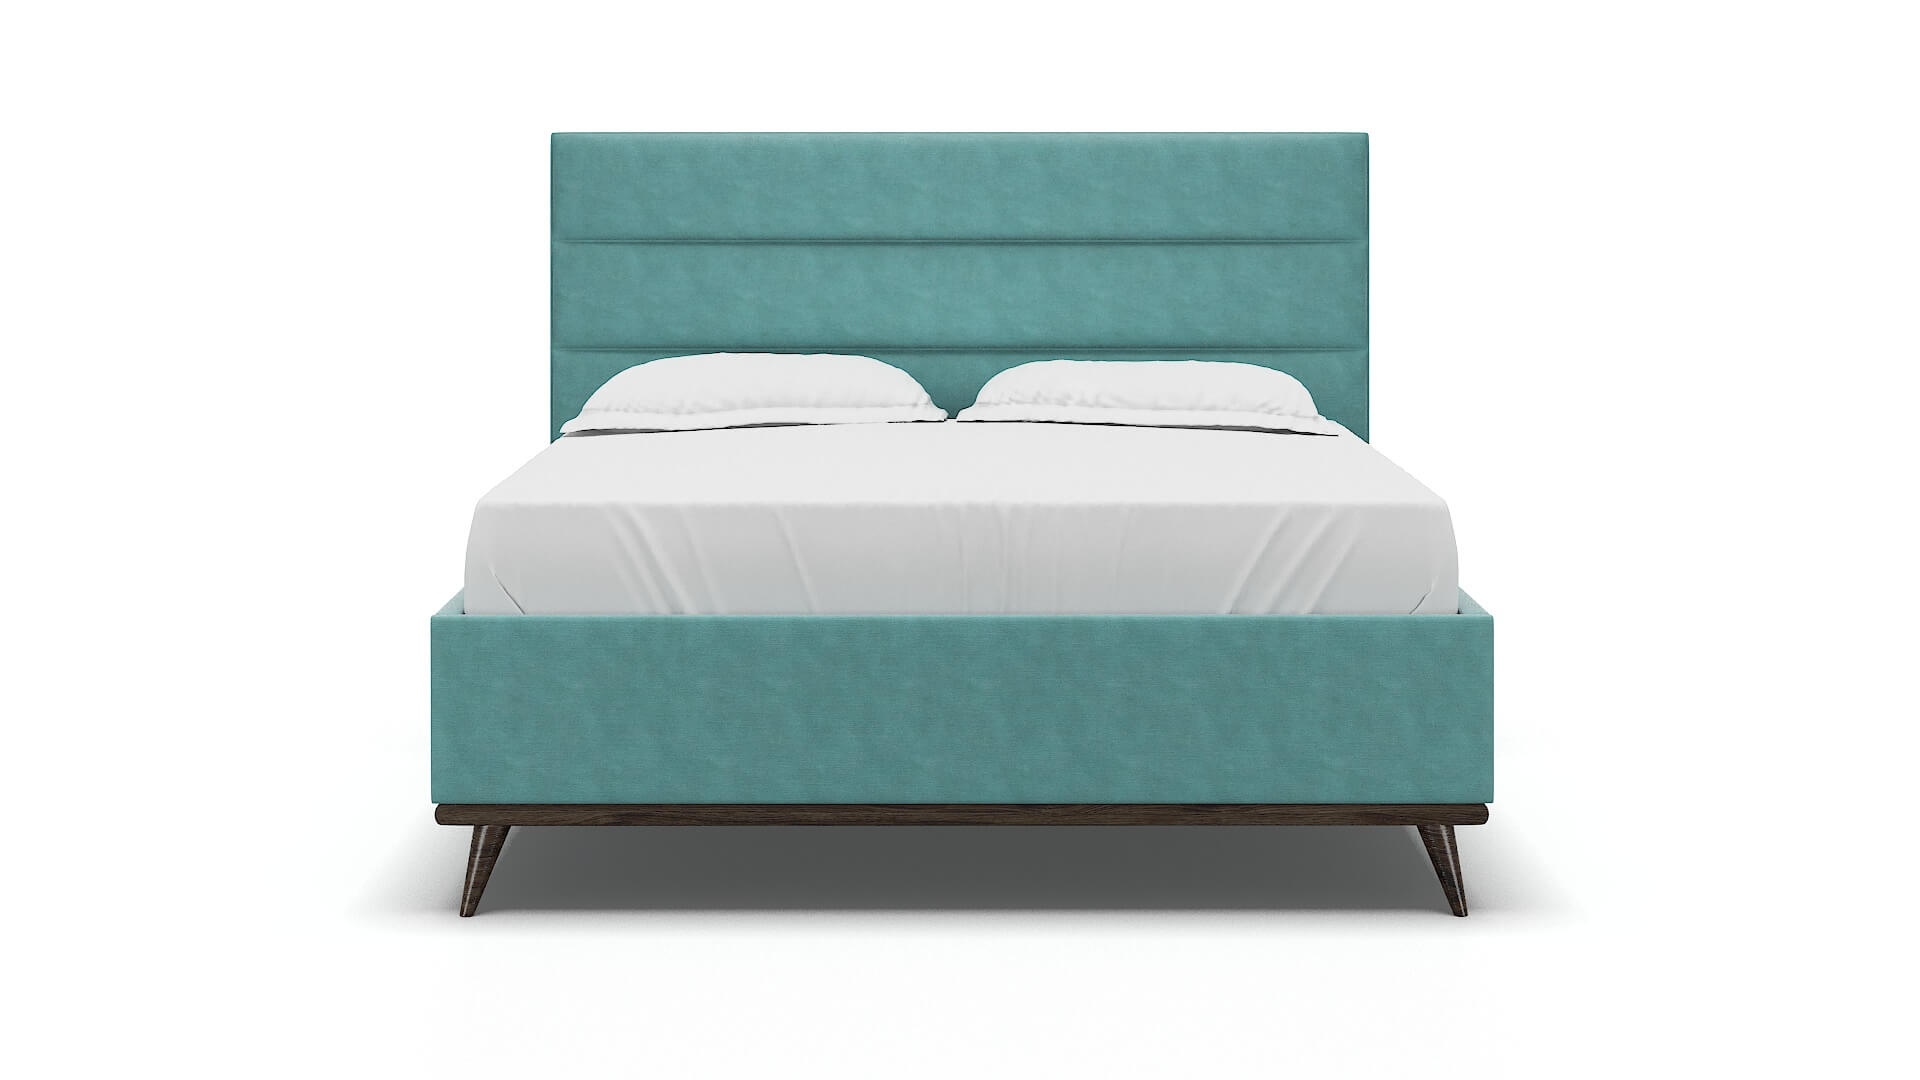 Hannela Curious Turquoise Bed King espresso legs 1